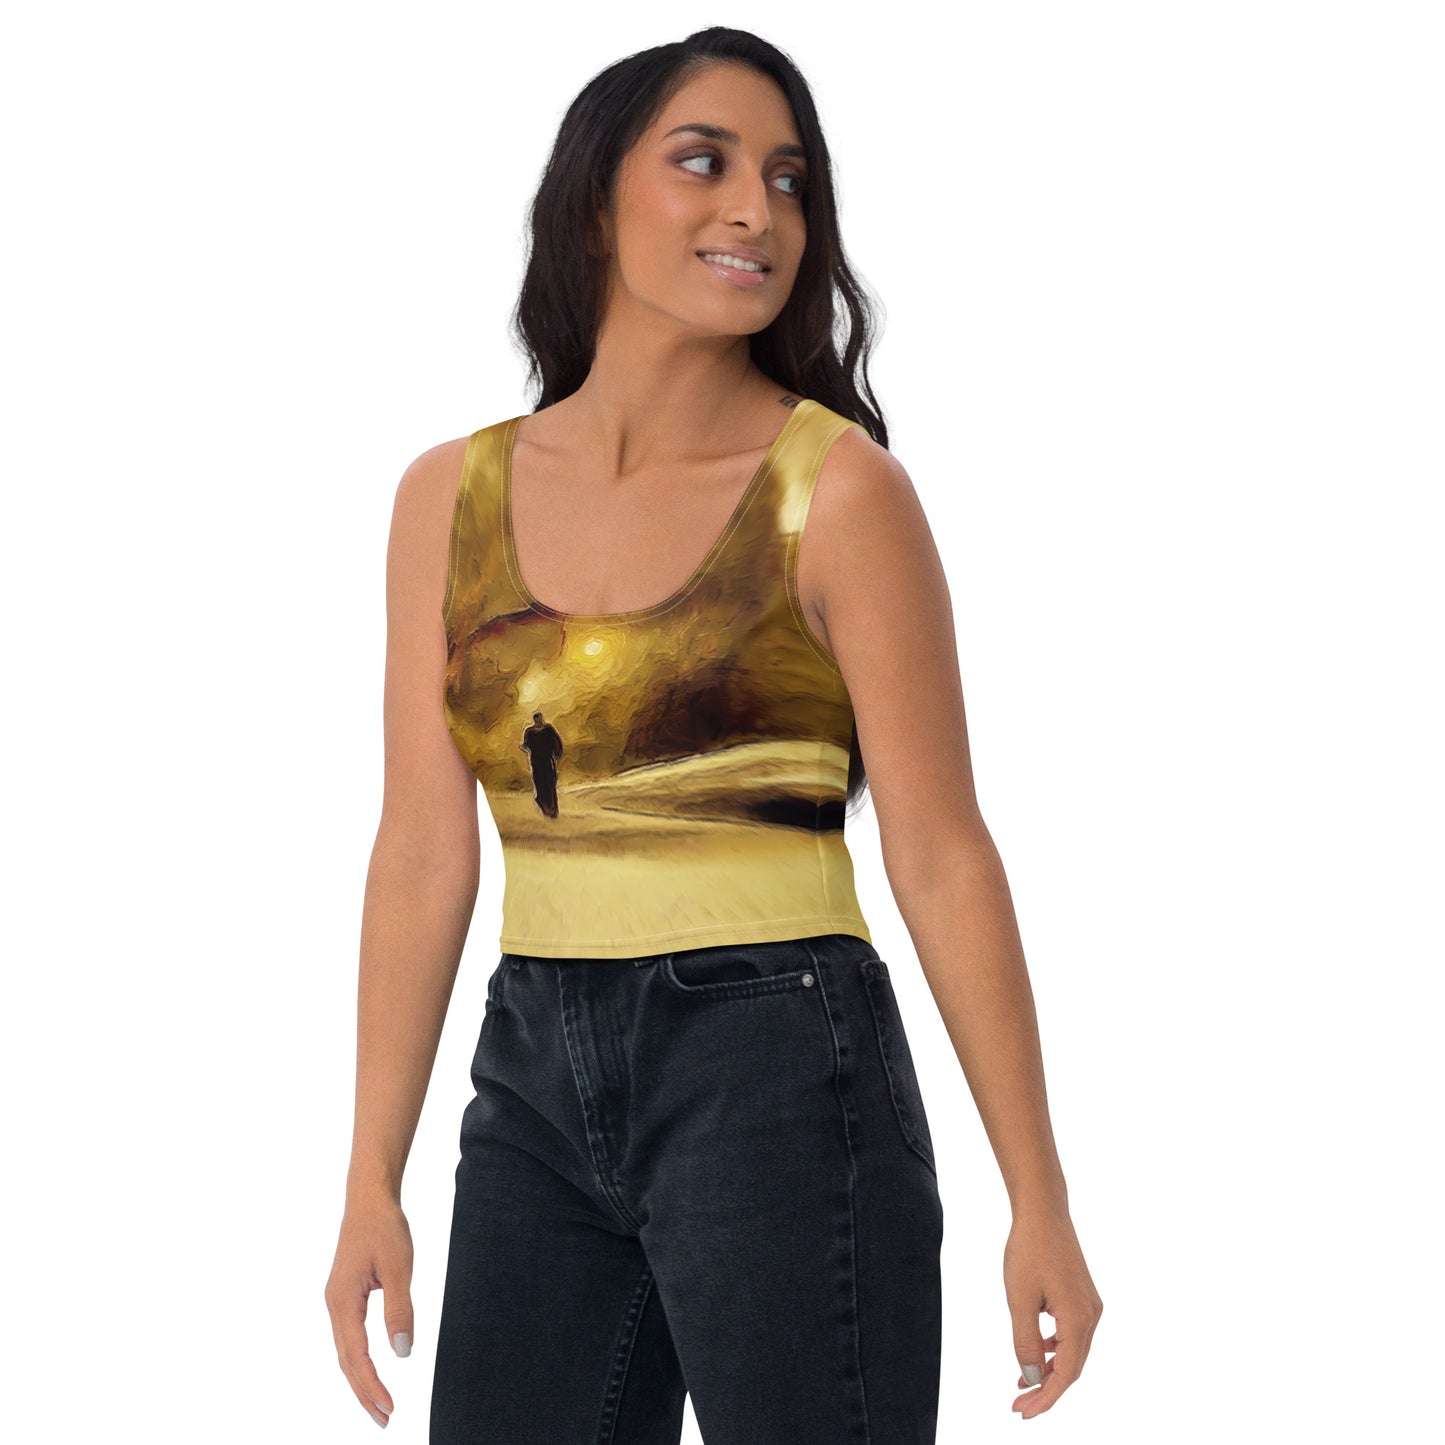 Eye Of The Sand Storm - Womens Crop Top